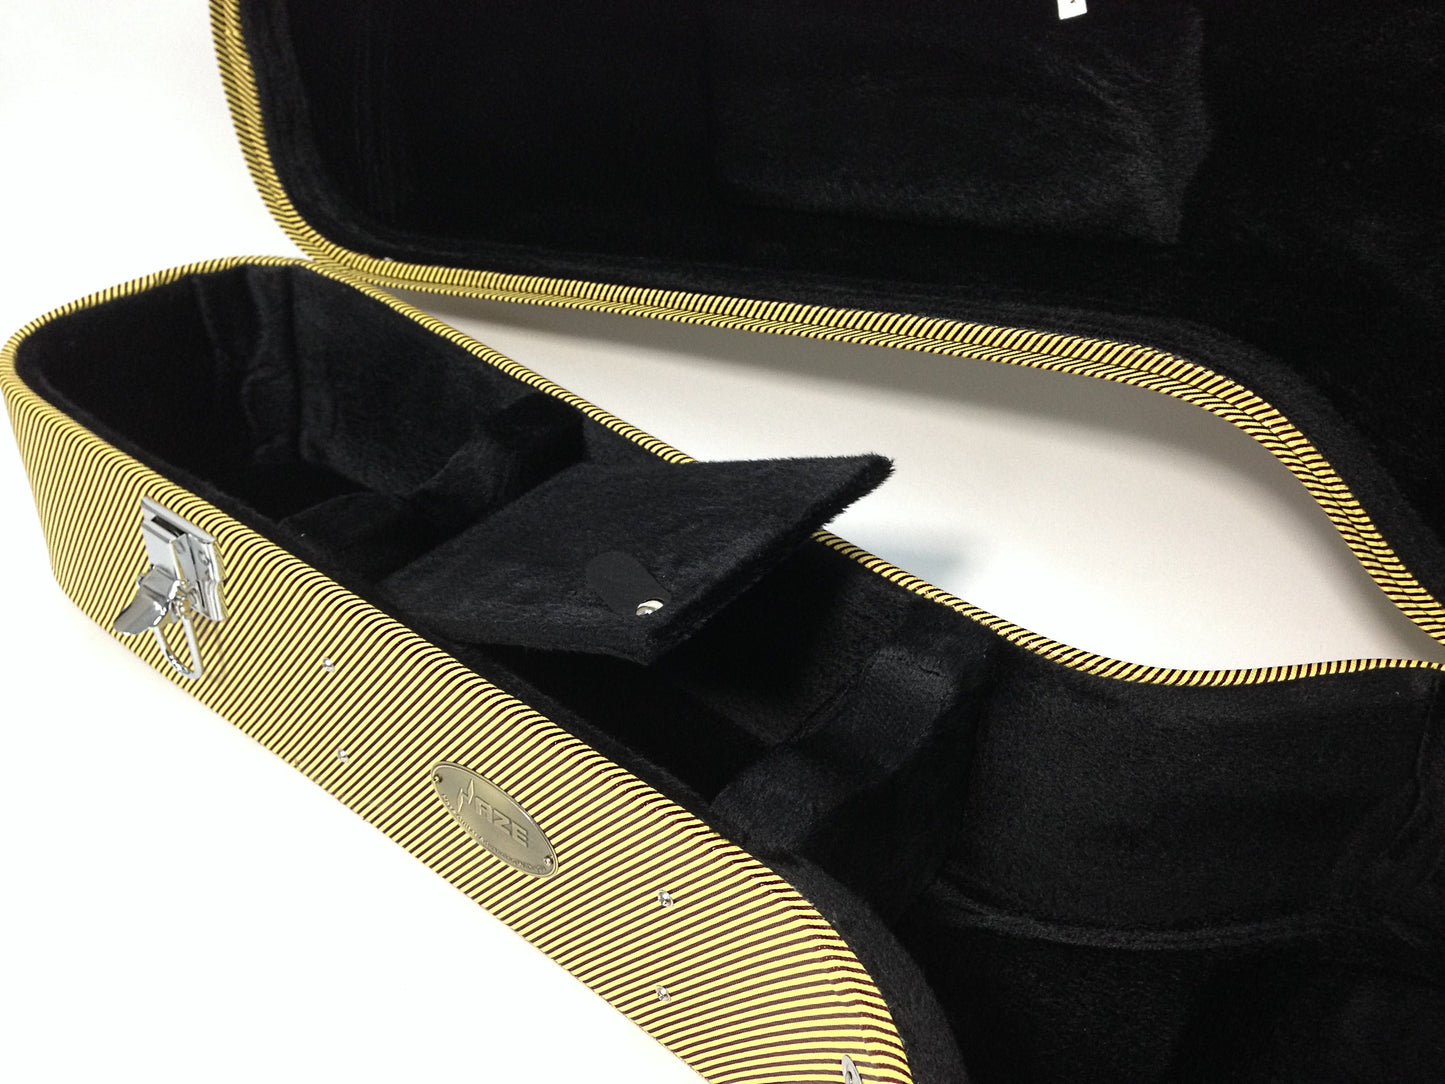 HPAA19020DAT Durable Hard Case for Dreadnought Acoustic Guitar Lockable w/Key, Yellow Twilling